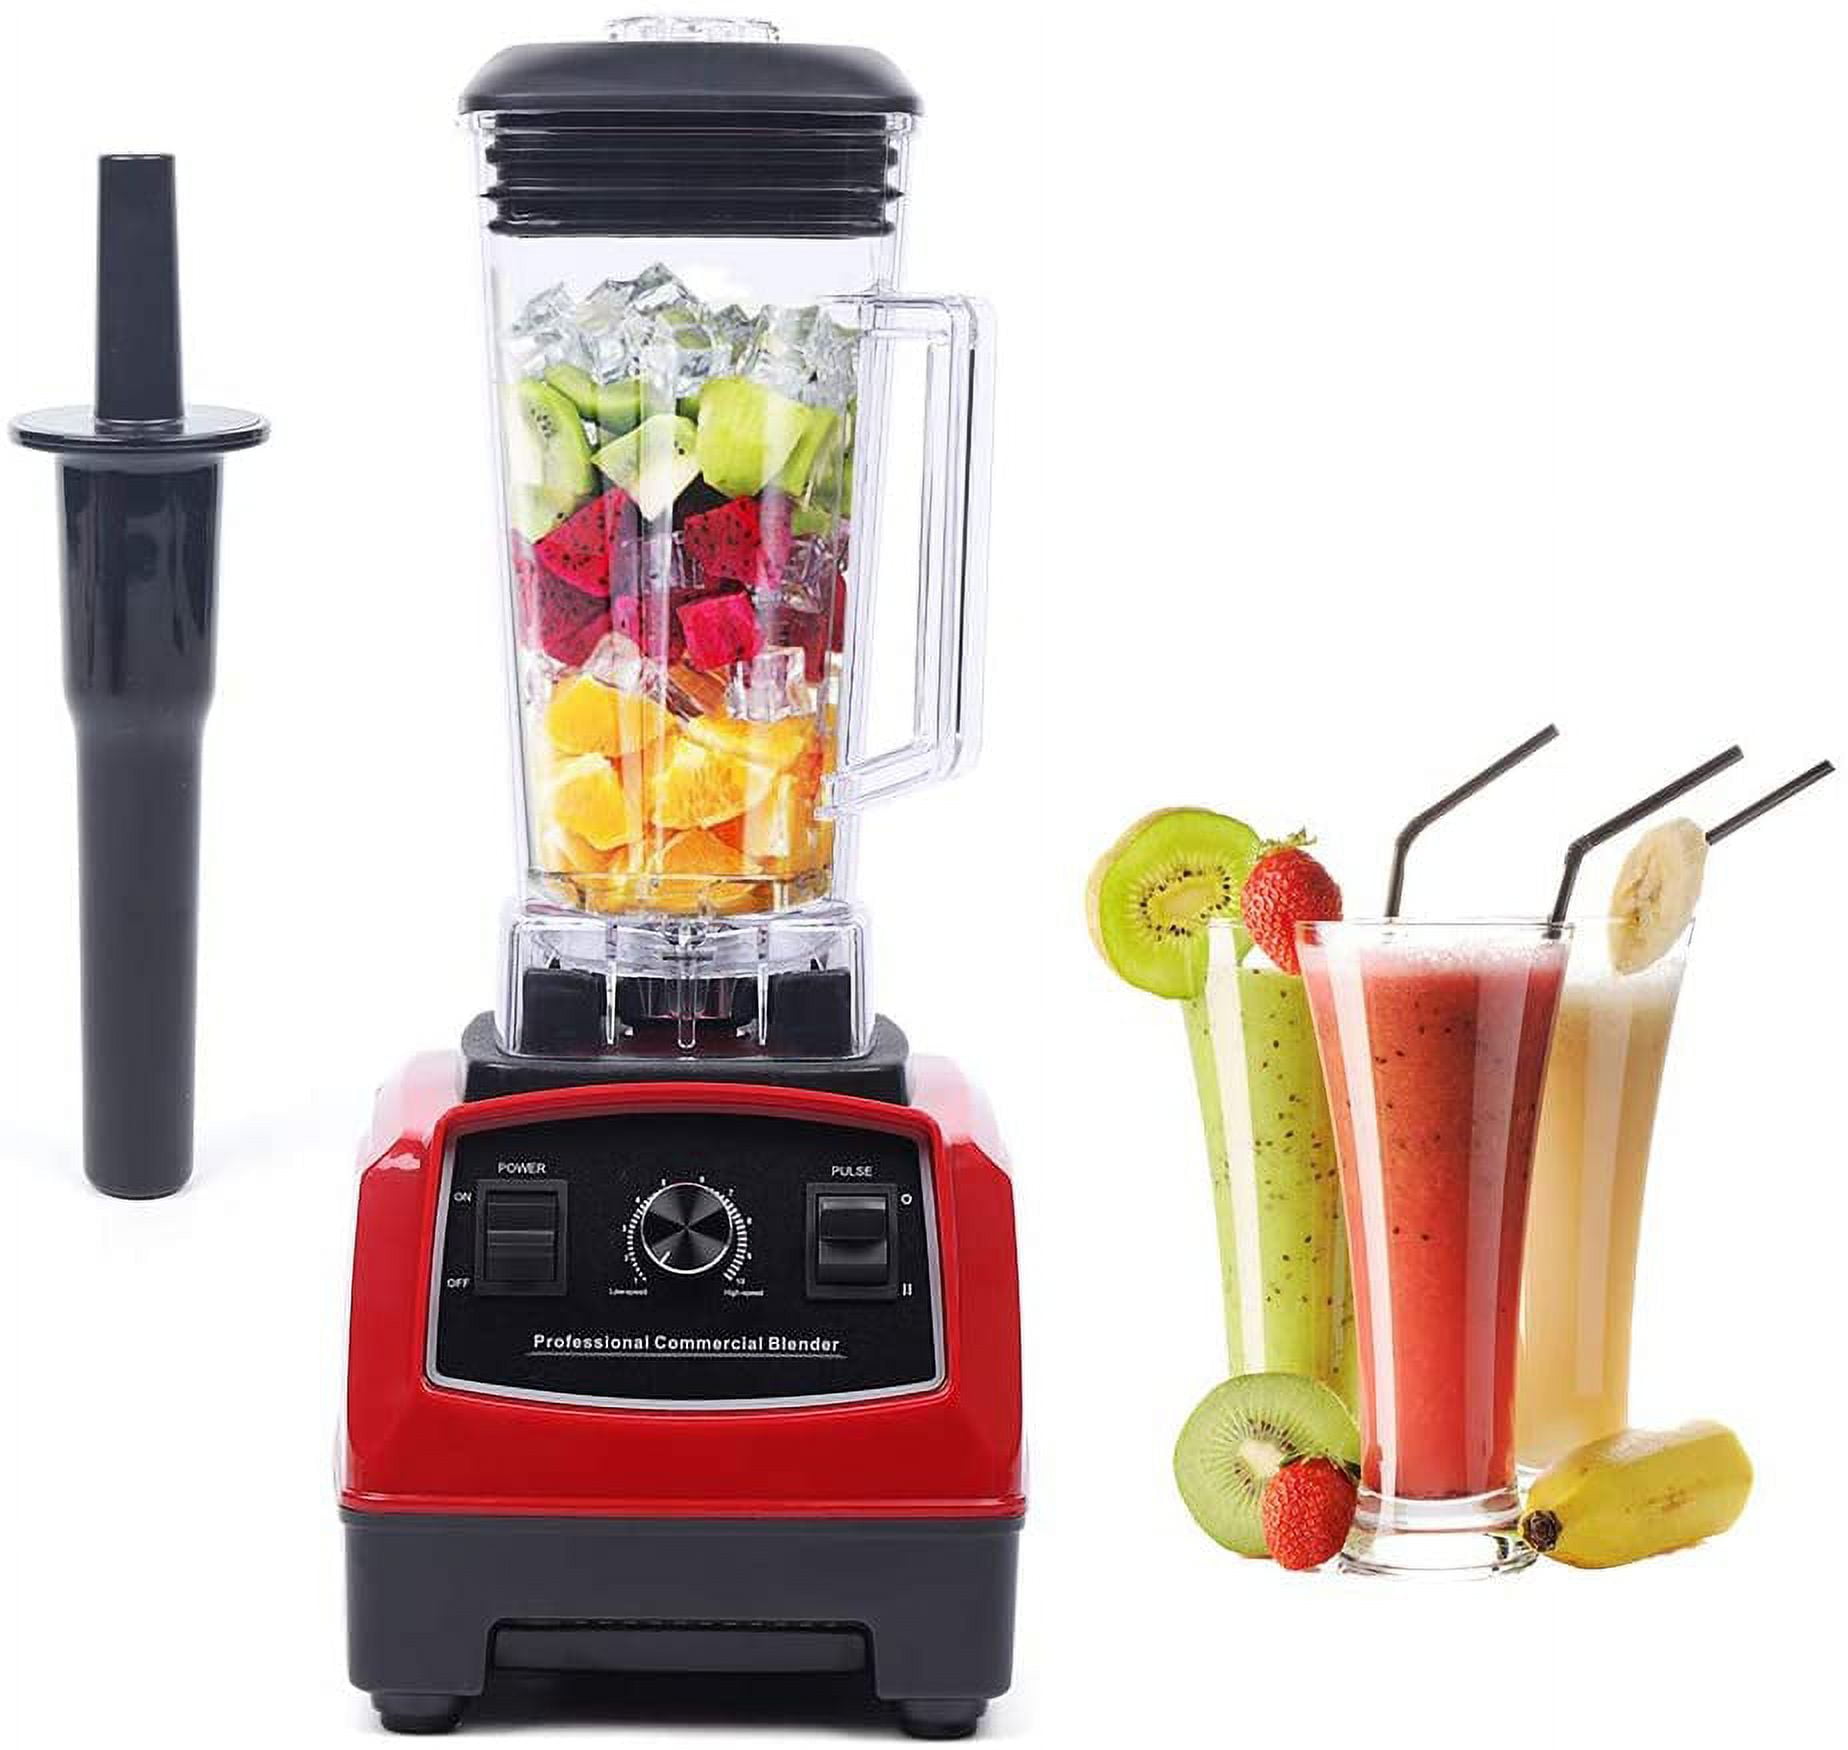  Juicer Mixer Grinder, Commercial-Grade 2200 Watt Motor  household Smoothie Blender For Wet and Dry Spices, Chutneys and Curries  (BLACK): Home & Kitchen